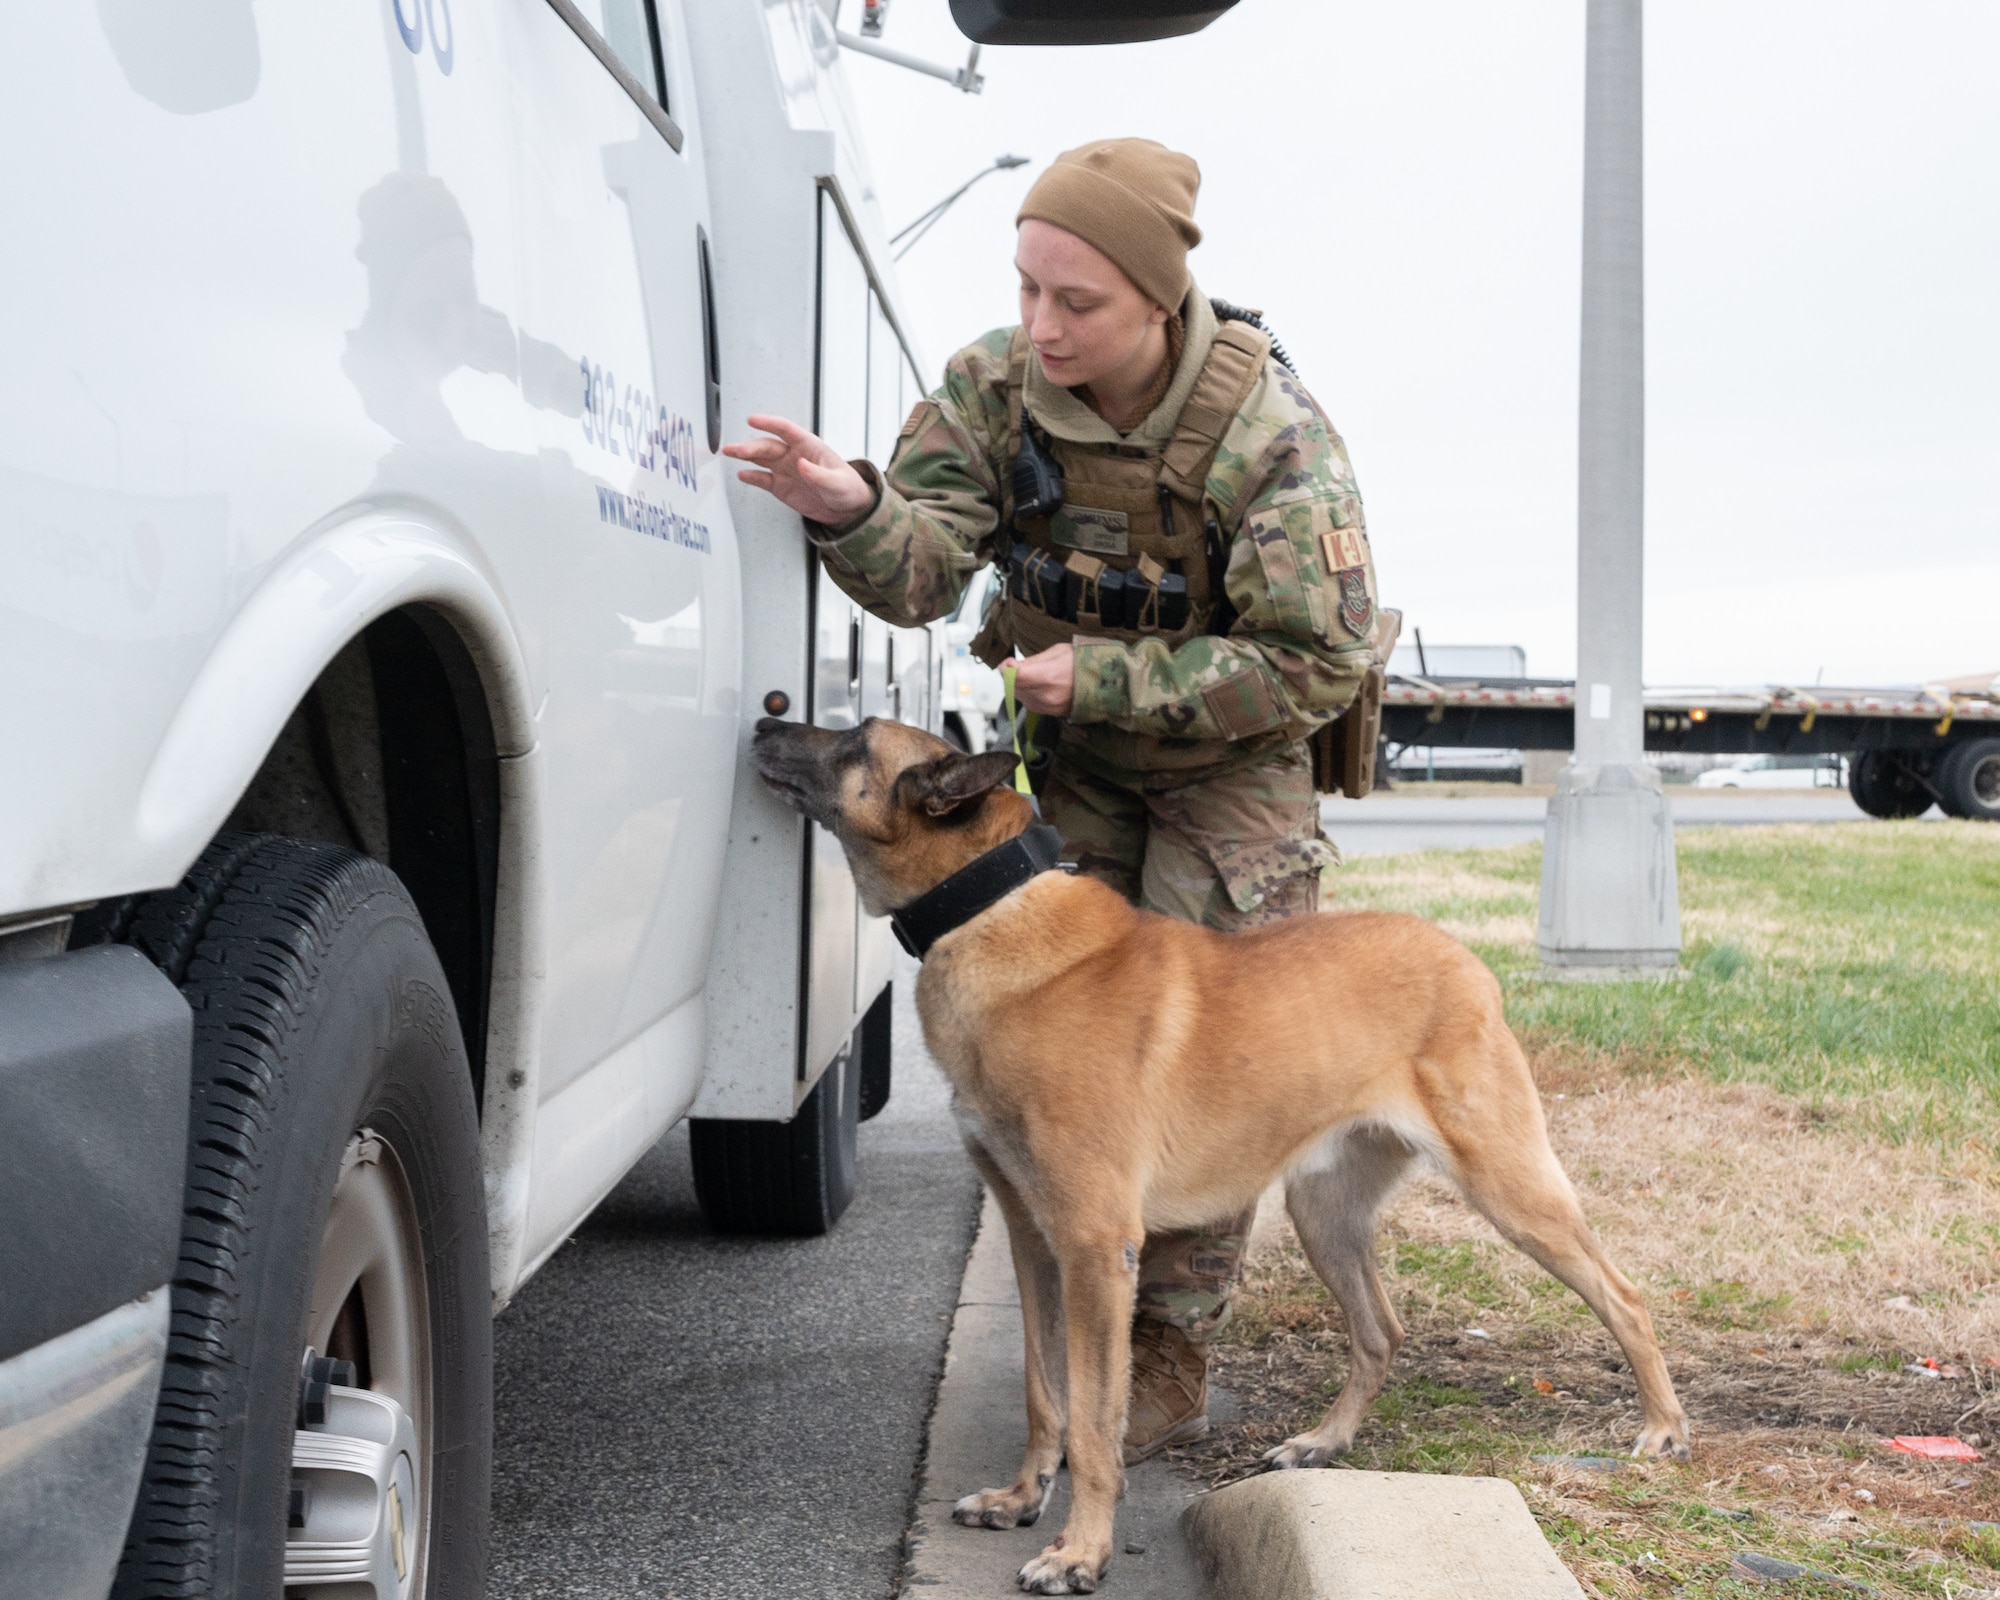 Senior Airman Courtney Burns, 436th Security Forces Squadron military working dog handler, and MWD Zorro inspect delivery vehicles entering the commercial gate on Dover Air Force Base, Delaware, Dec. 22, 2022. Team Dover Airmen continue to provide unrivaled installation support, rapid global airlift and combat ready Airmen 24 hours of the day, 365 days of the year. (U.S. Air Force photo by Mauricio Campino)